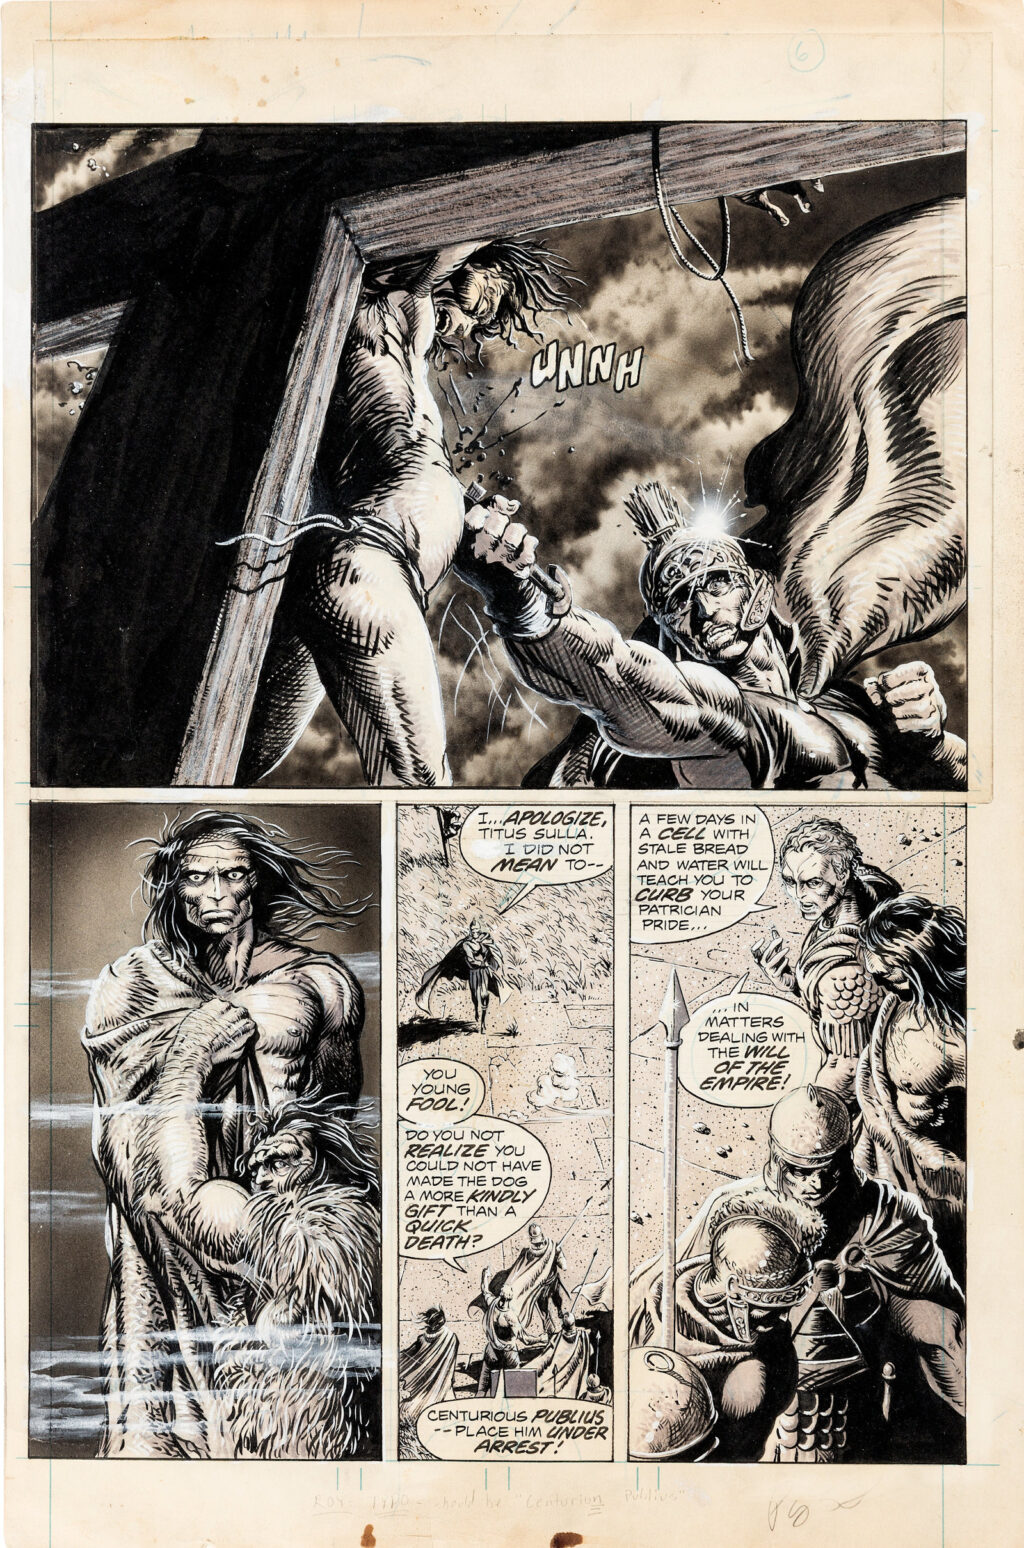 The Savage Sword of Conan issue 16 page 53 by Barry Smith and Tim Conrad